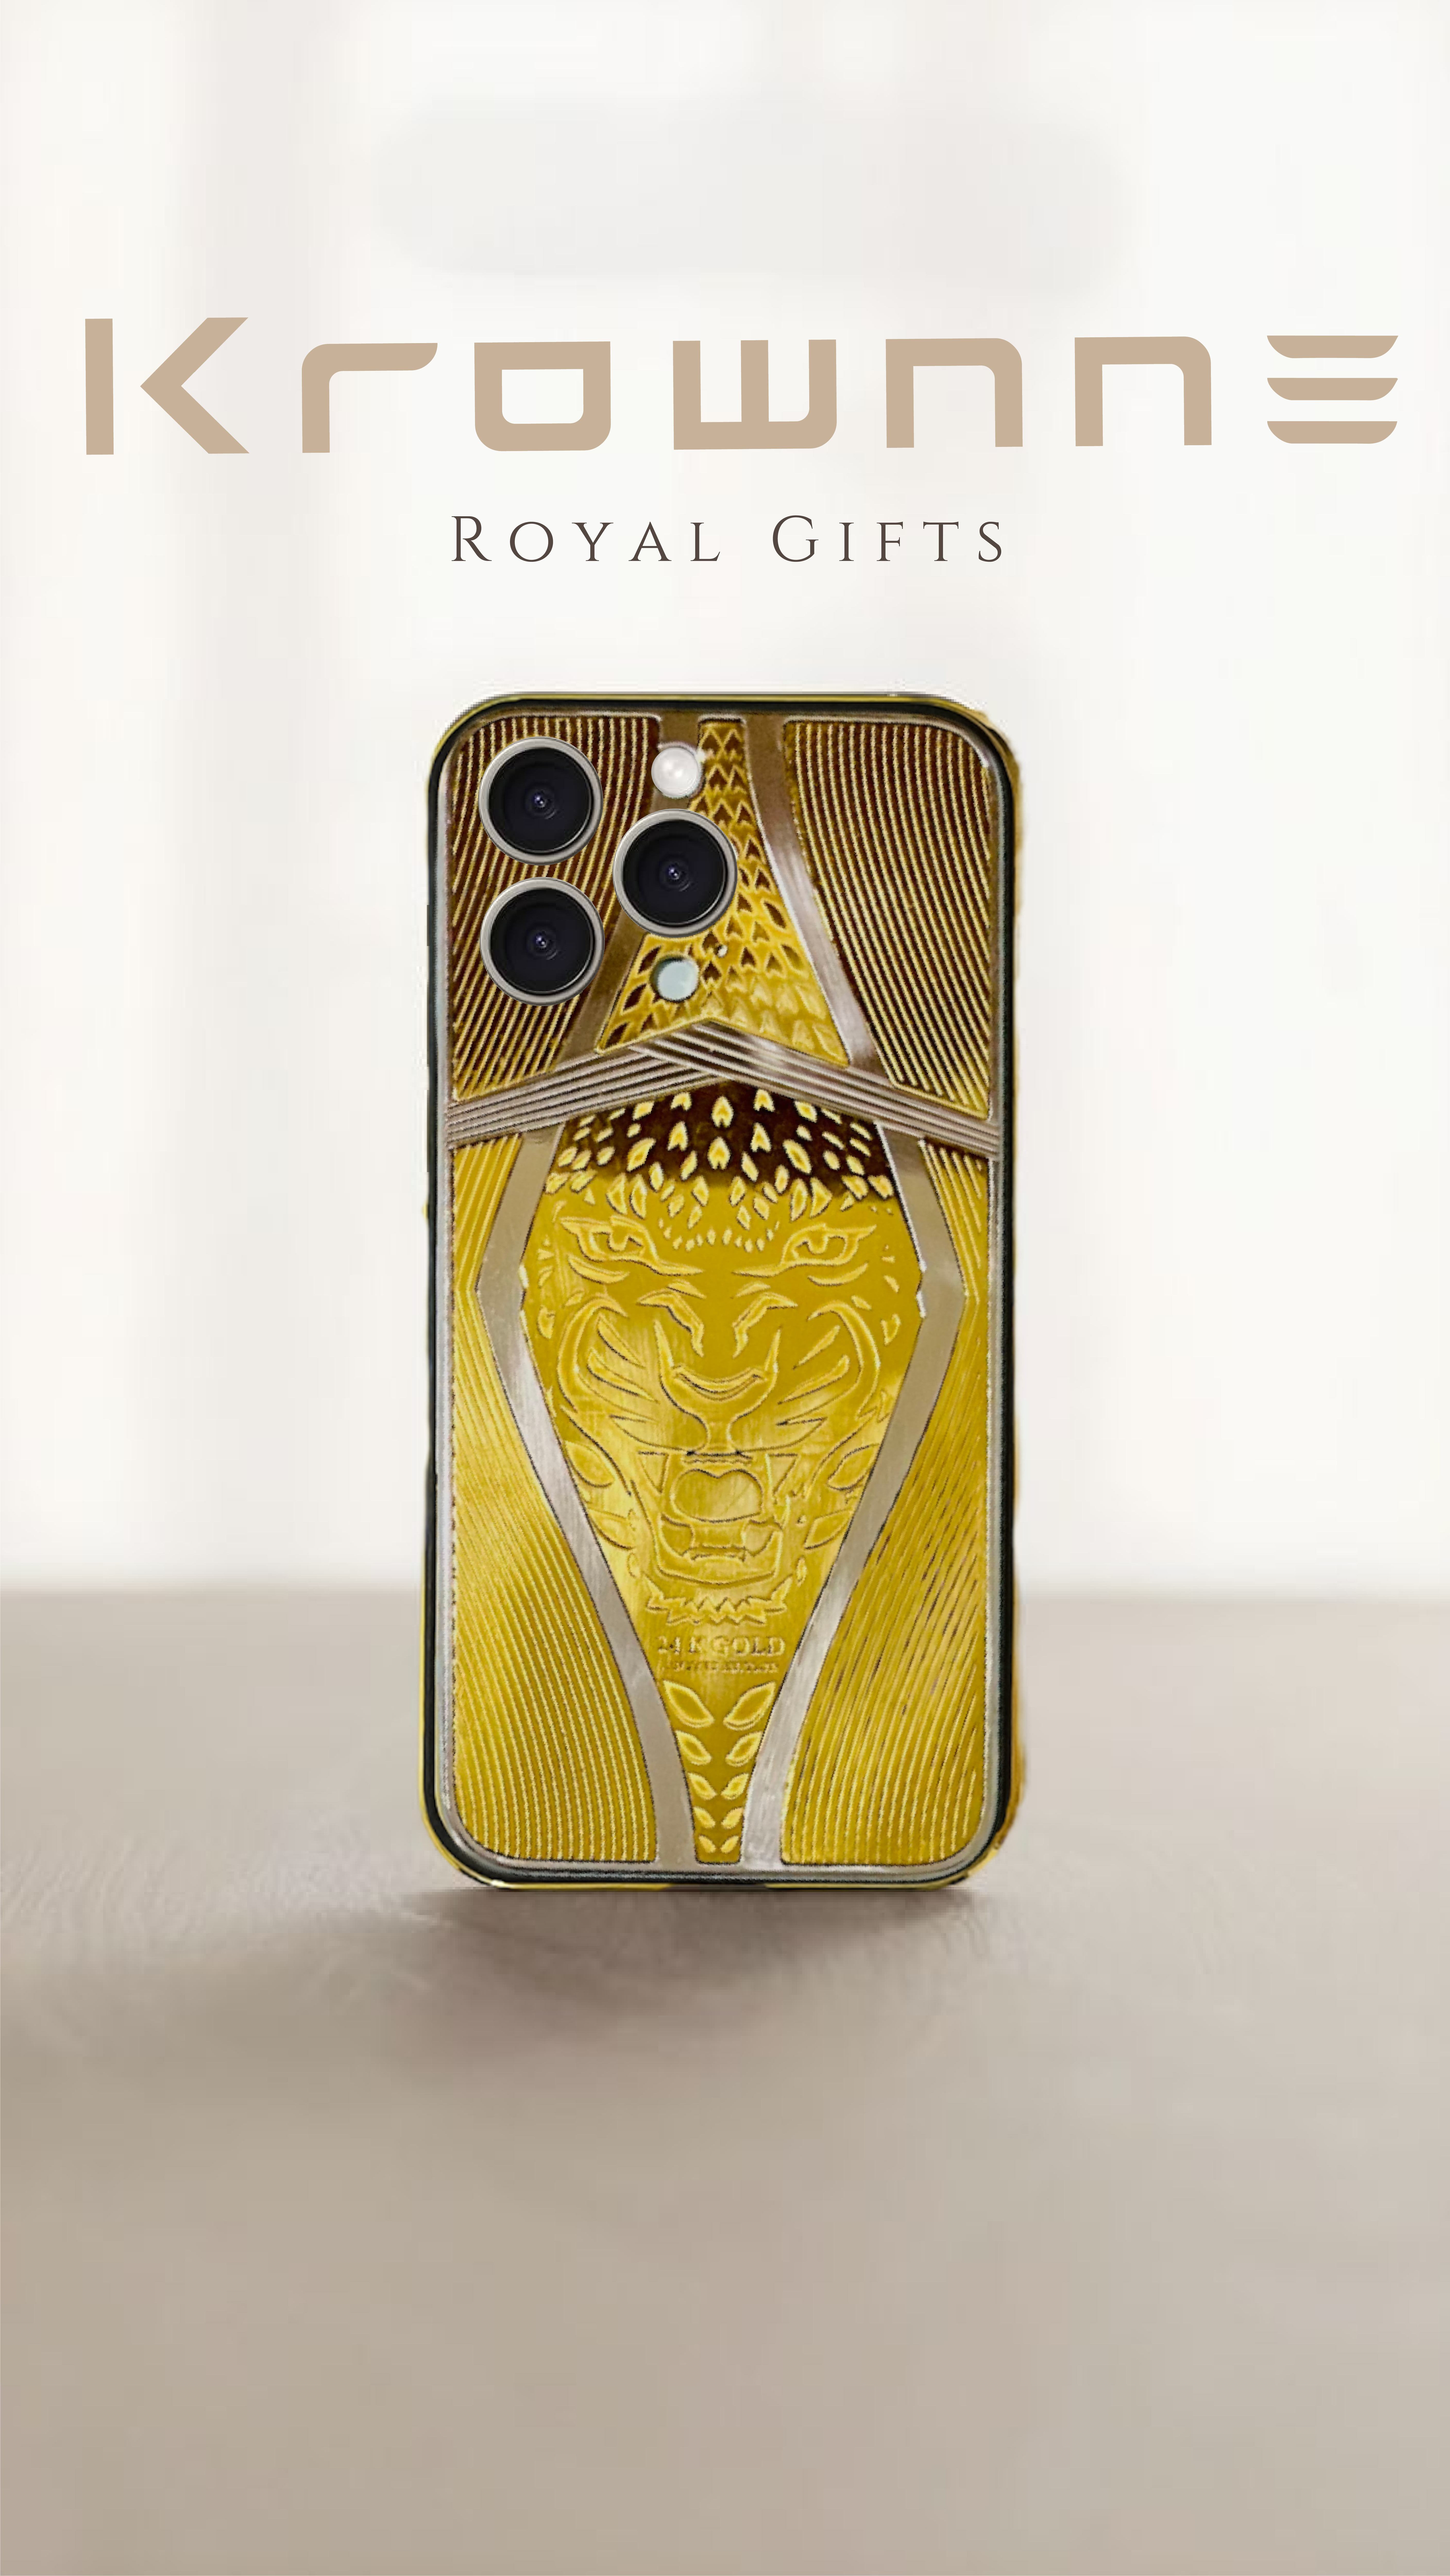 Custom gold iPhone cover with personalized engraving